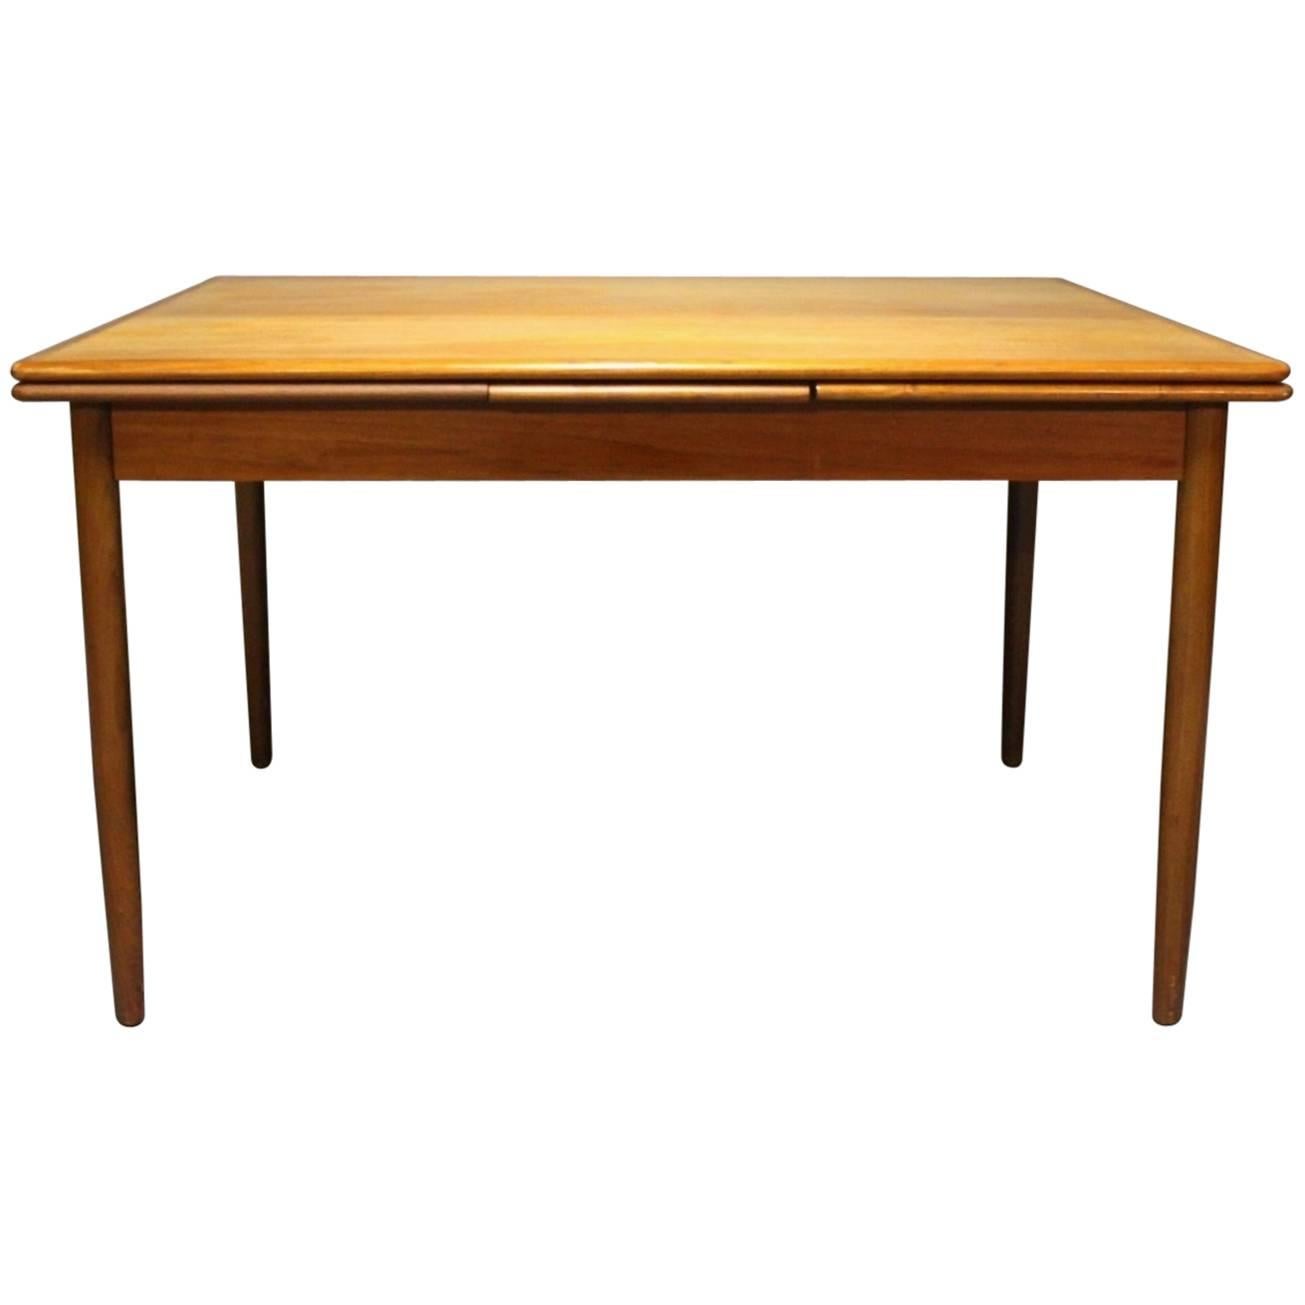 Dining Table in Teak with Extension, Danish Design, 1960s